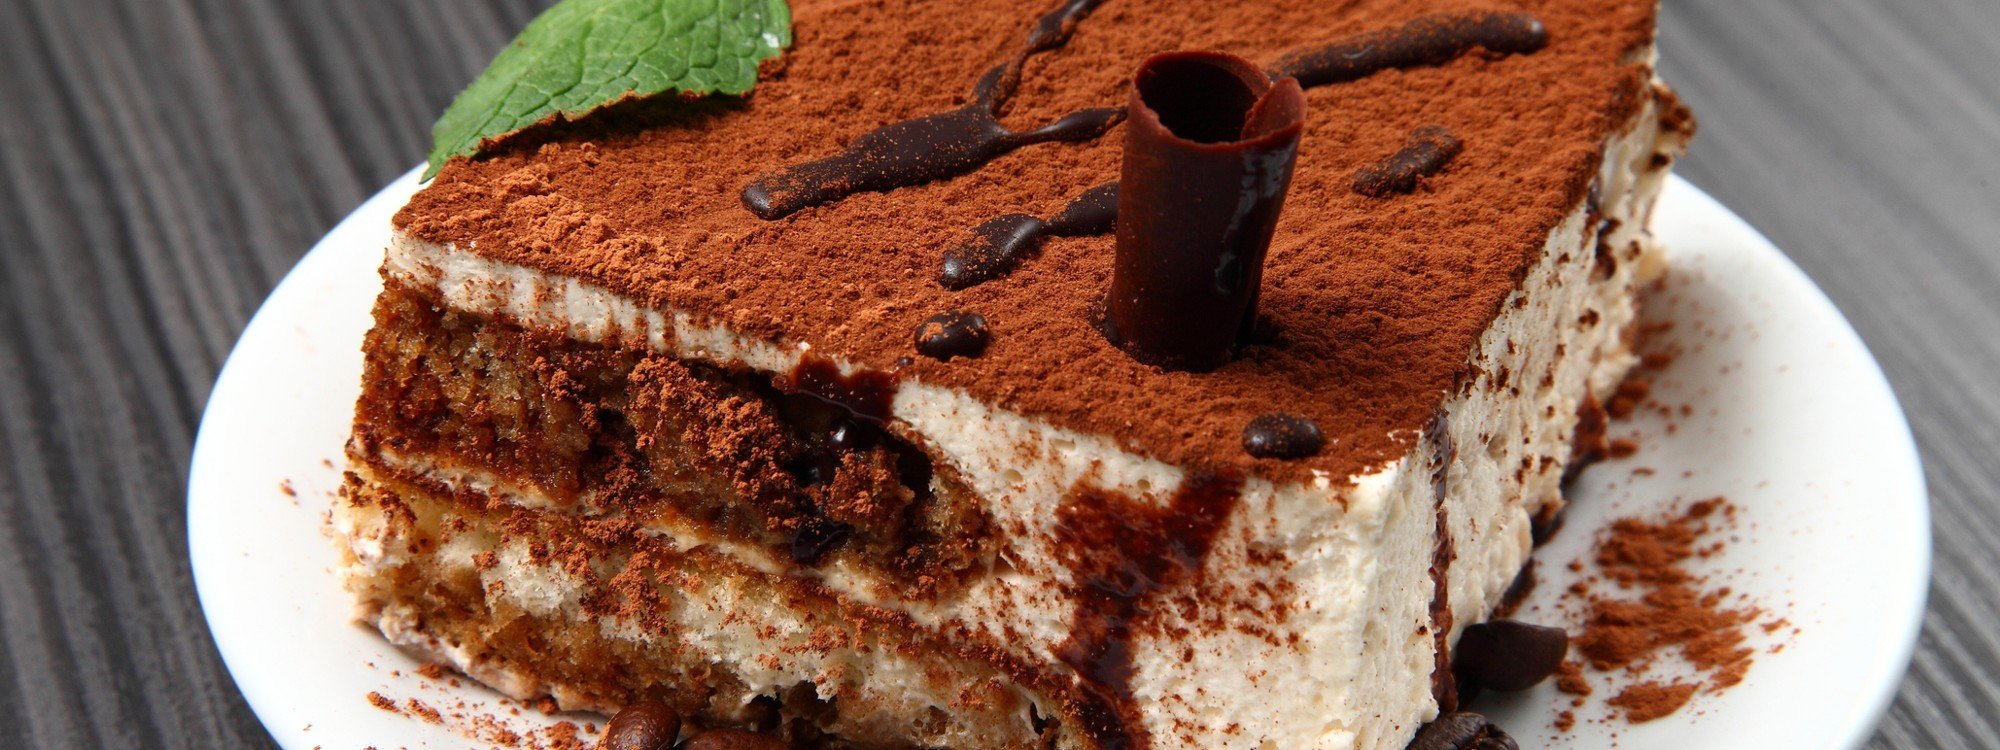 Is Tiramisu An Aphrodisiac The Illicit Origins Of The Italian Dessert Born In Brothels And Fit For Playboys And Kings South China Morning Post